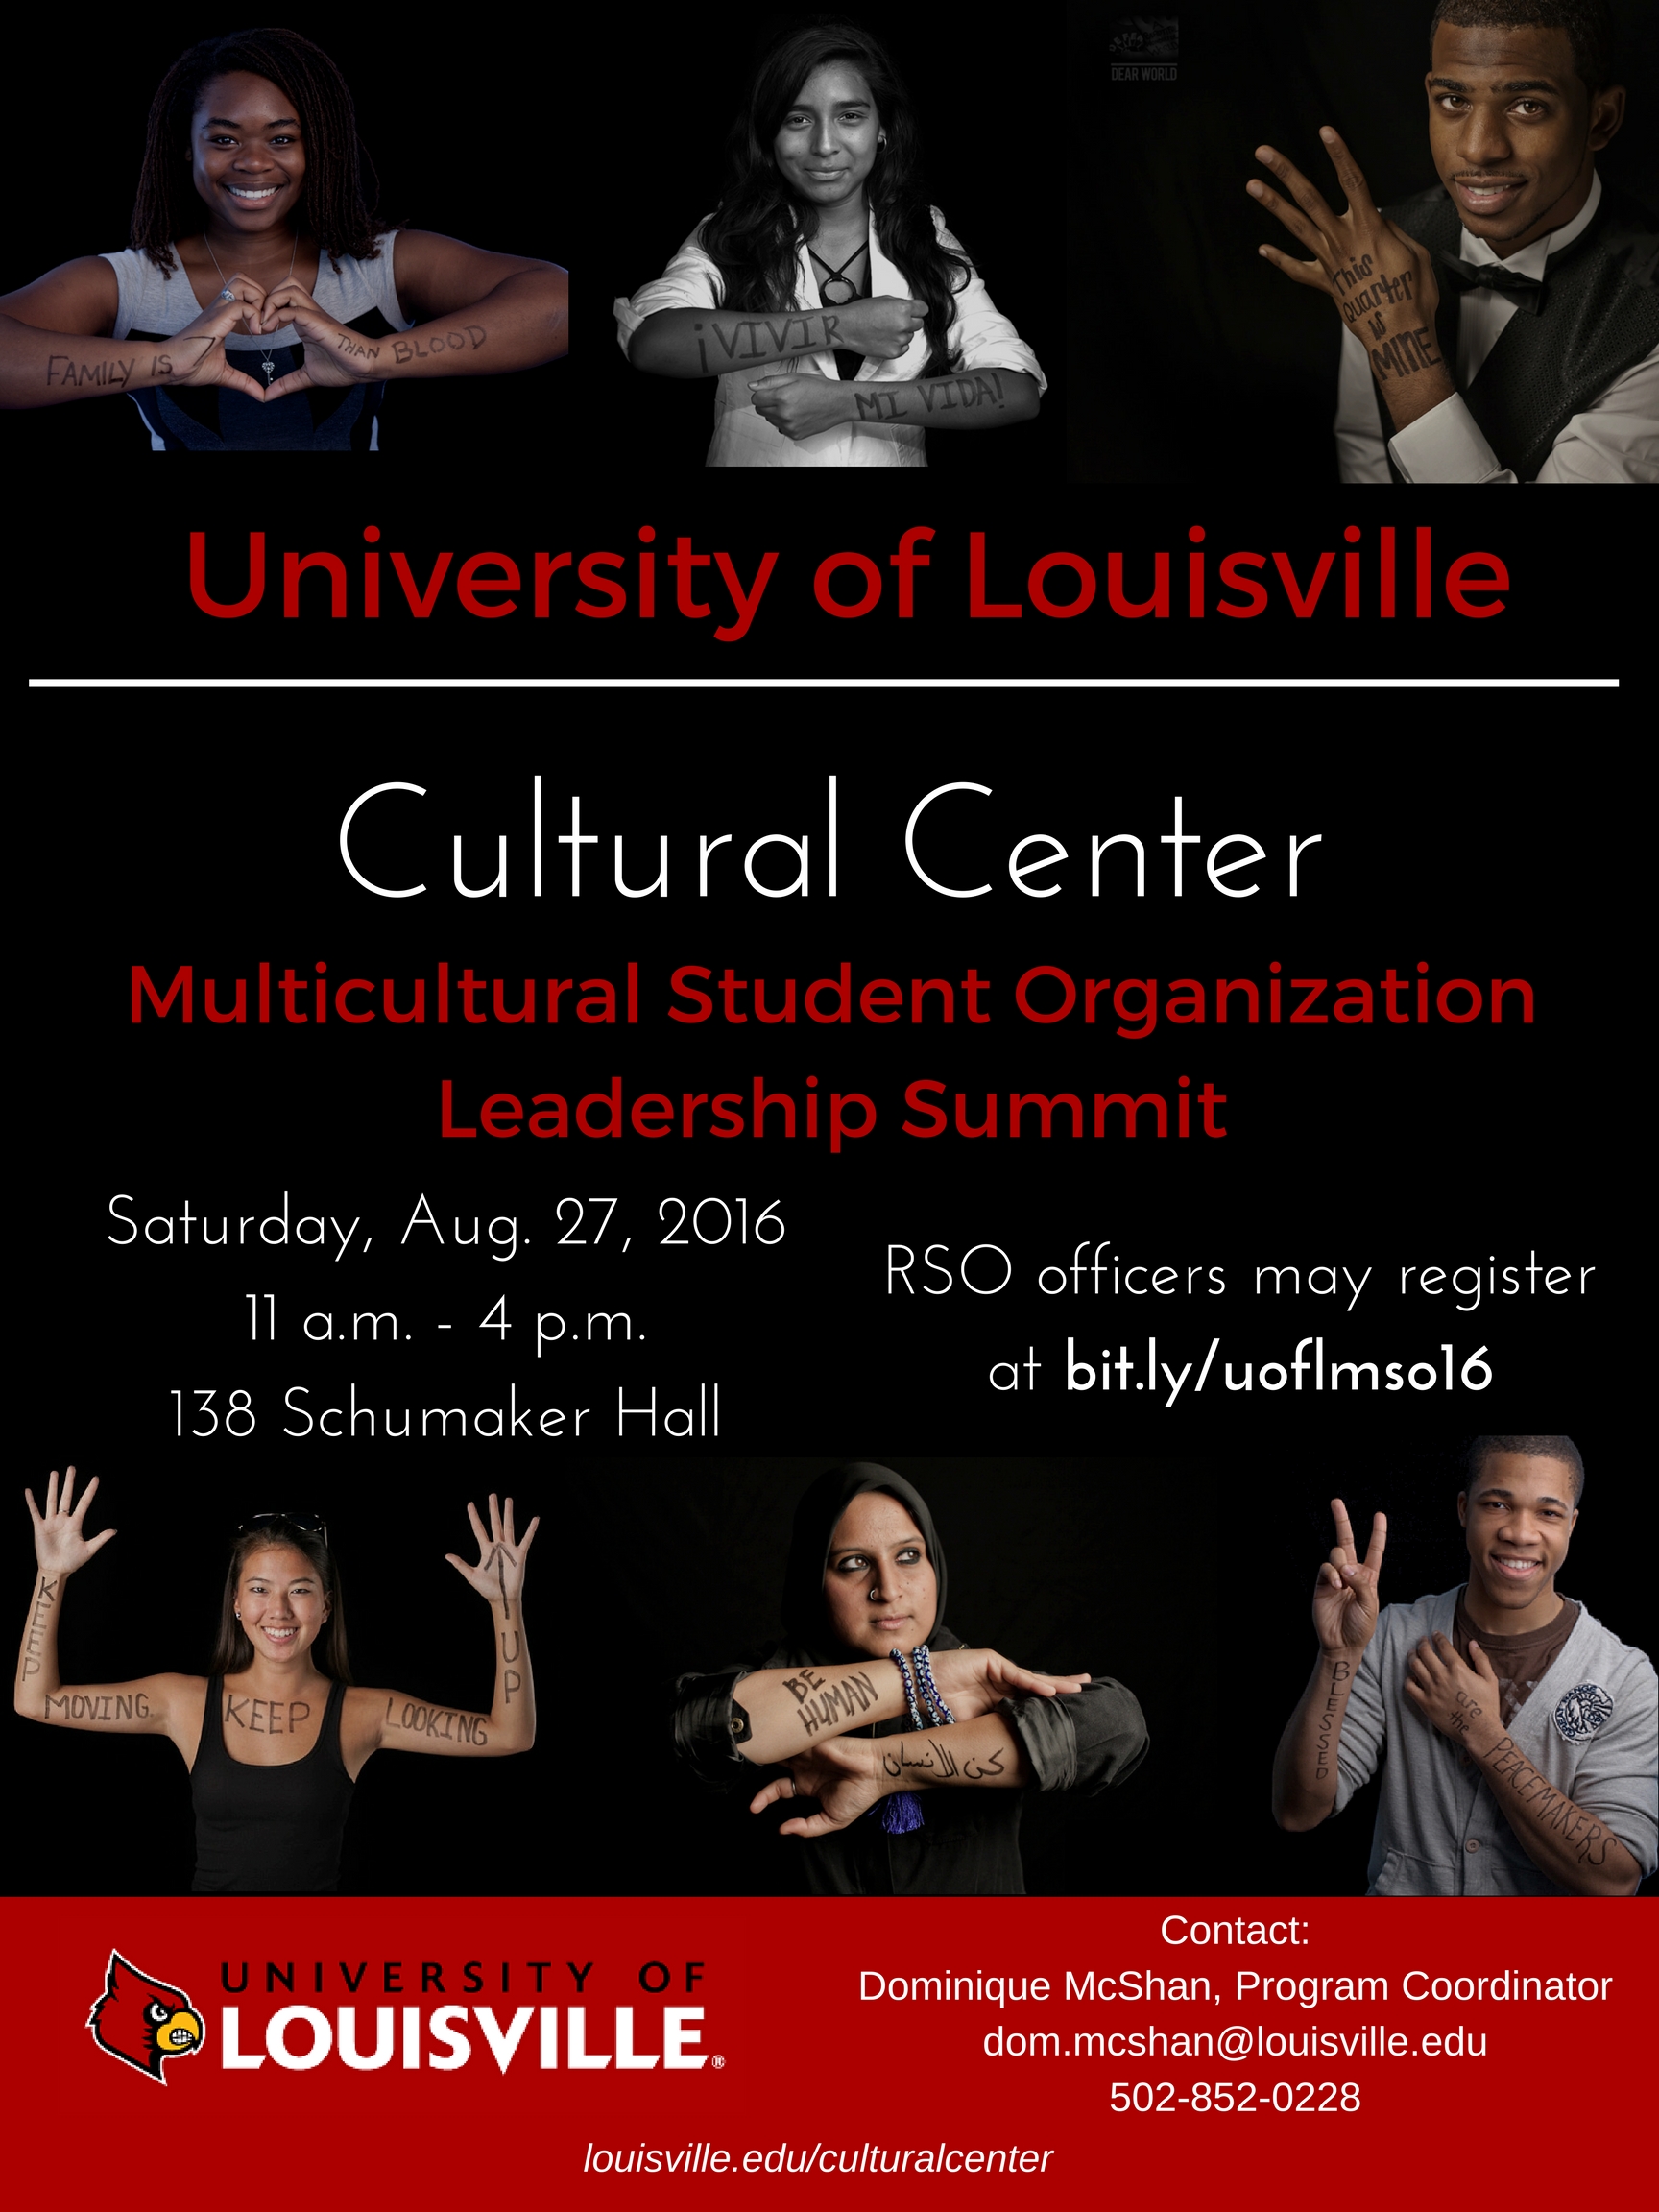 Registration Open for the Multicultural Student Organization Summit!